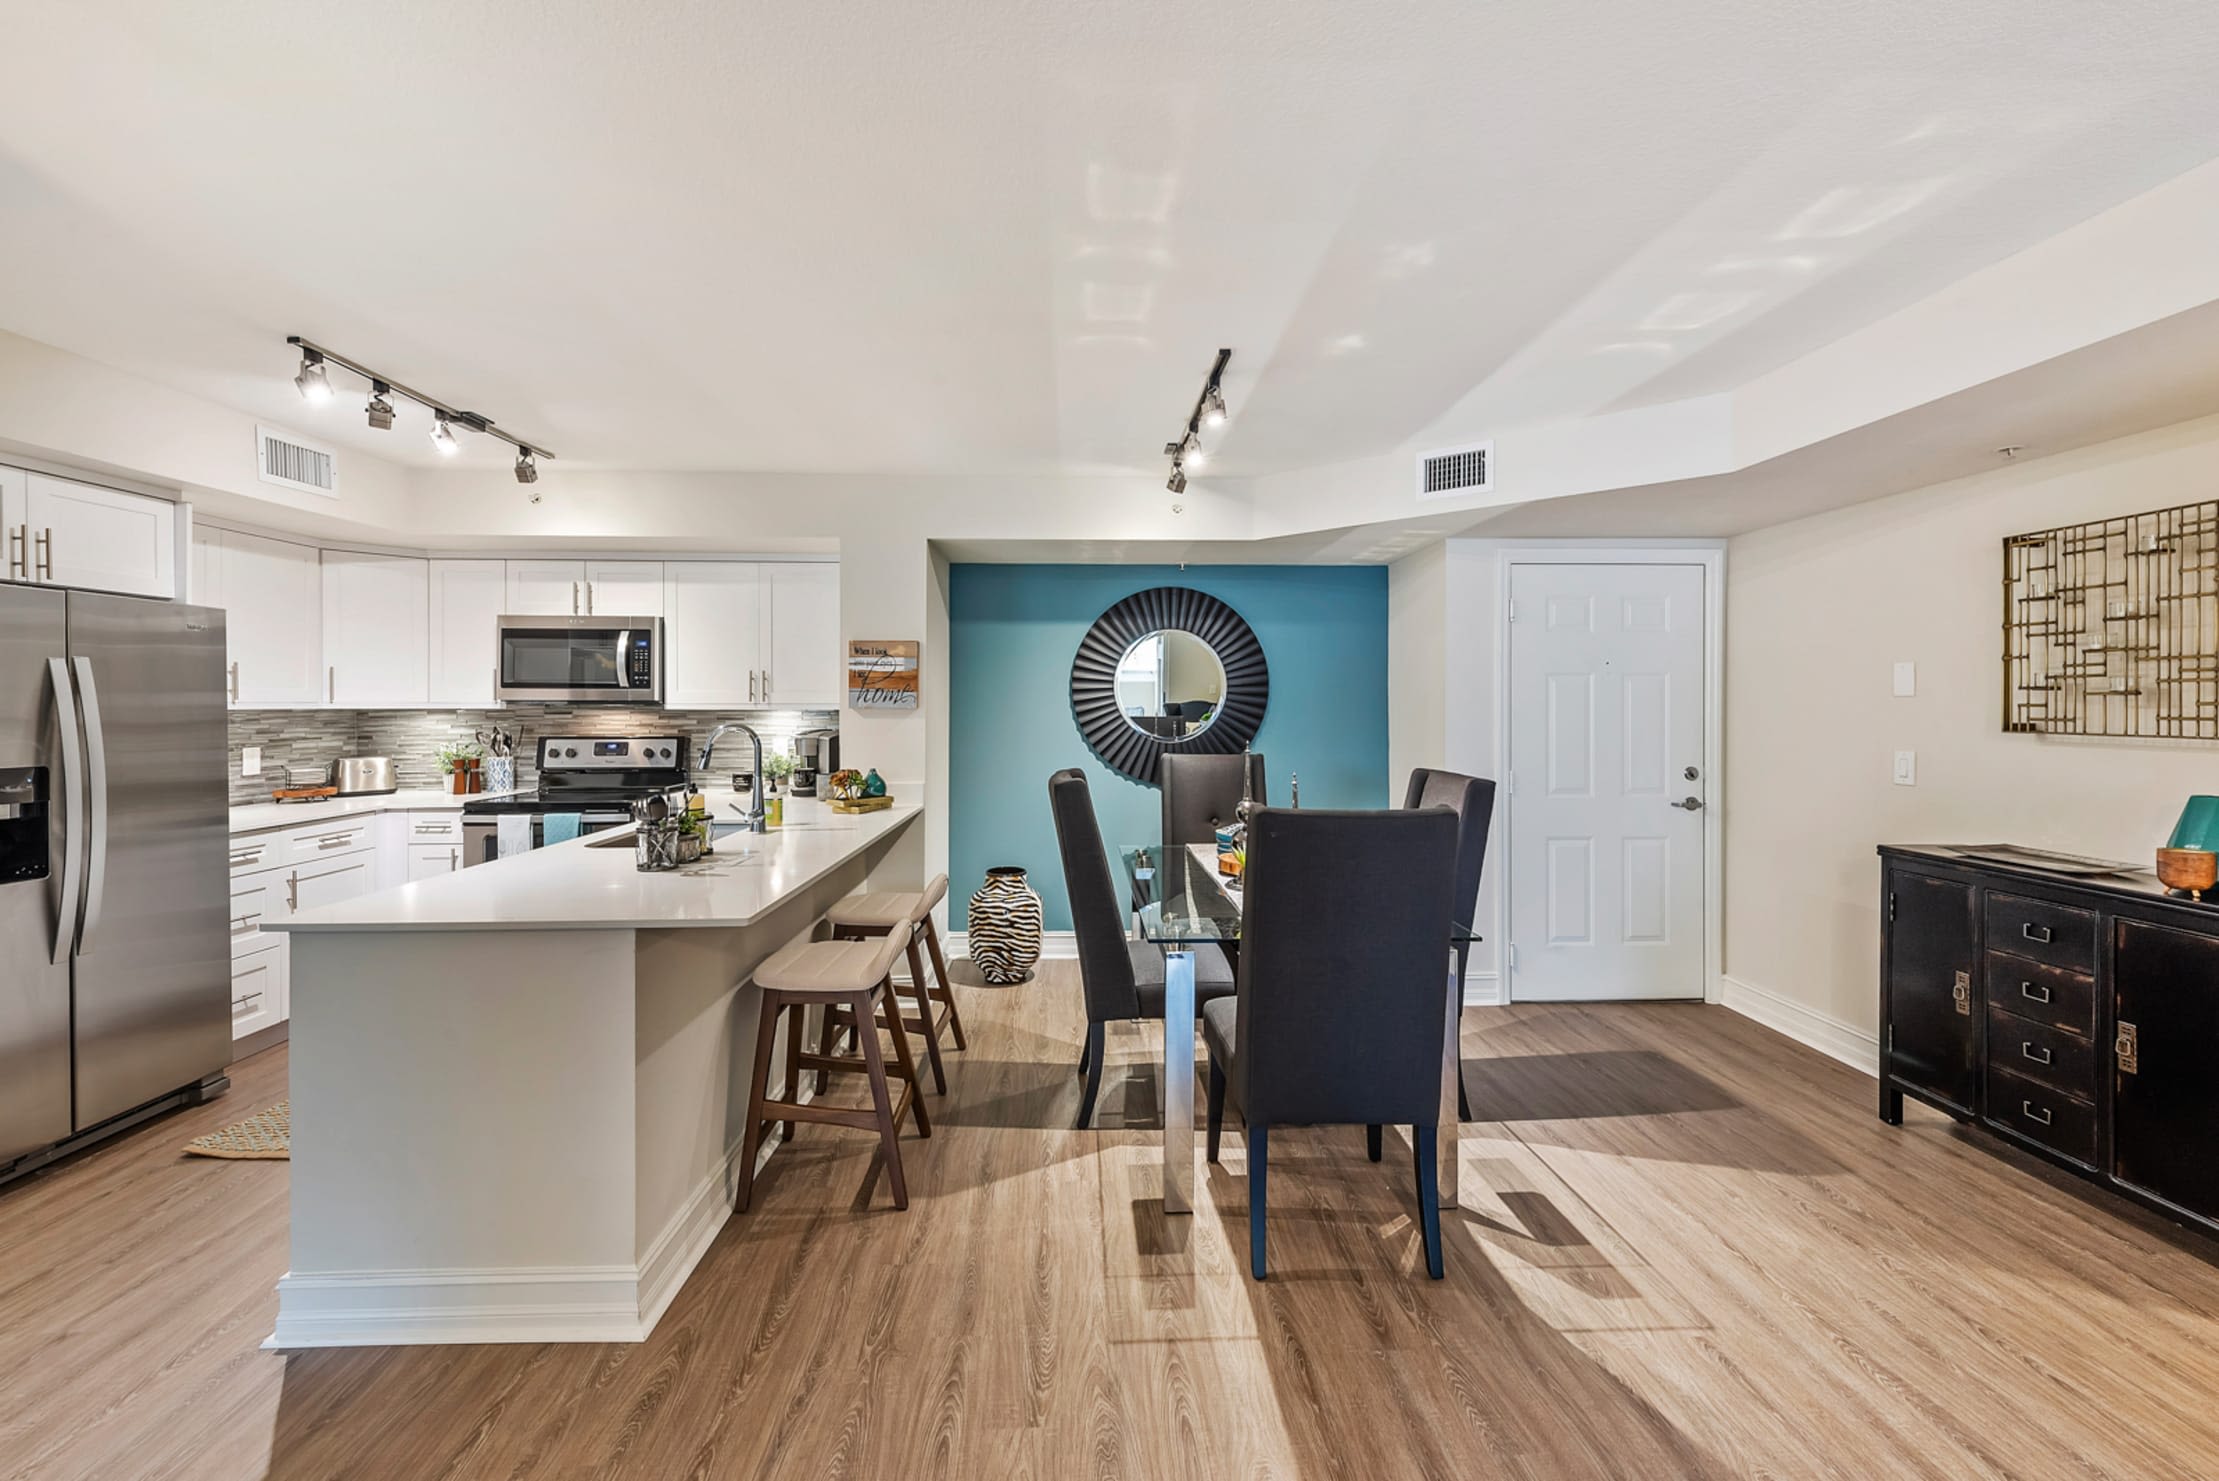 Spacious dining room and kitchen area at Crescent House Apartments in Miami Lakes, Florida